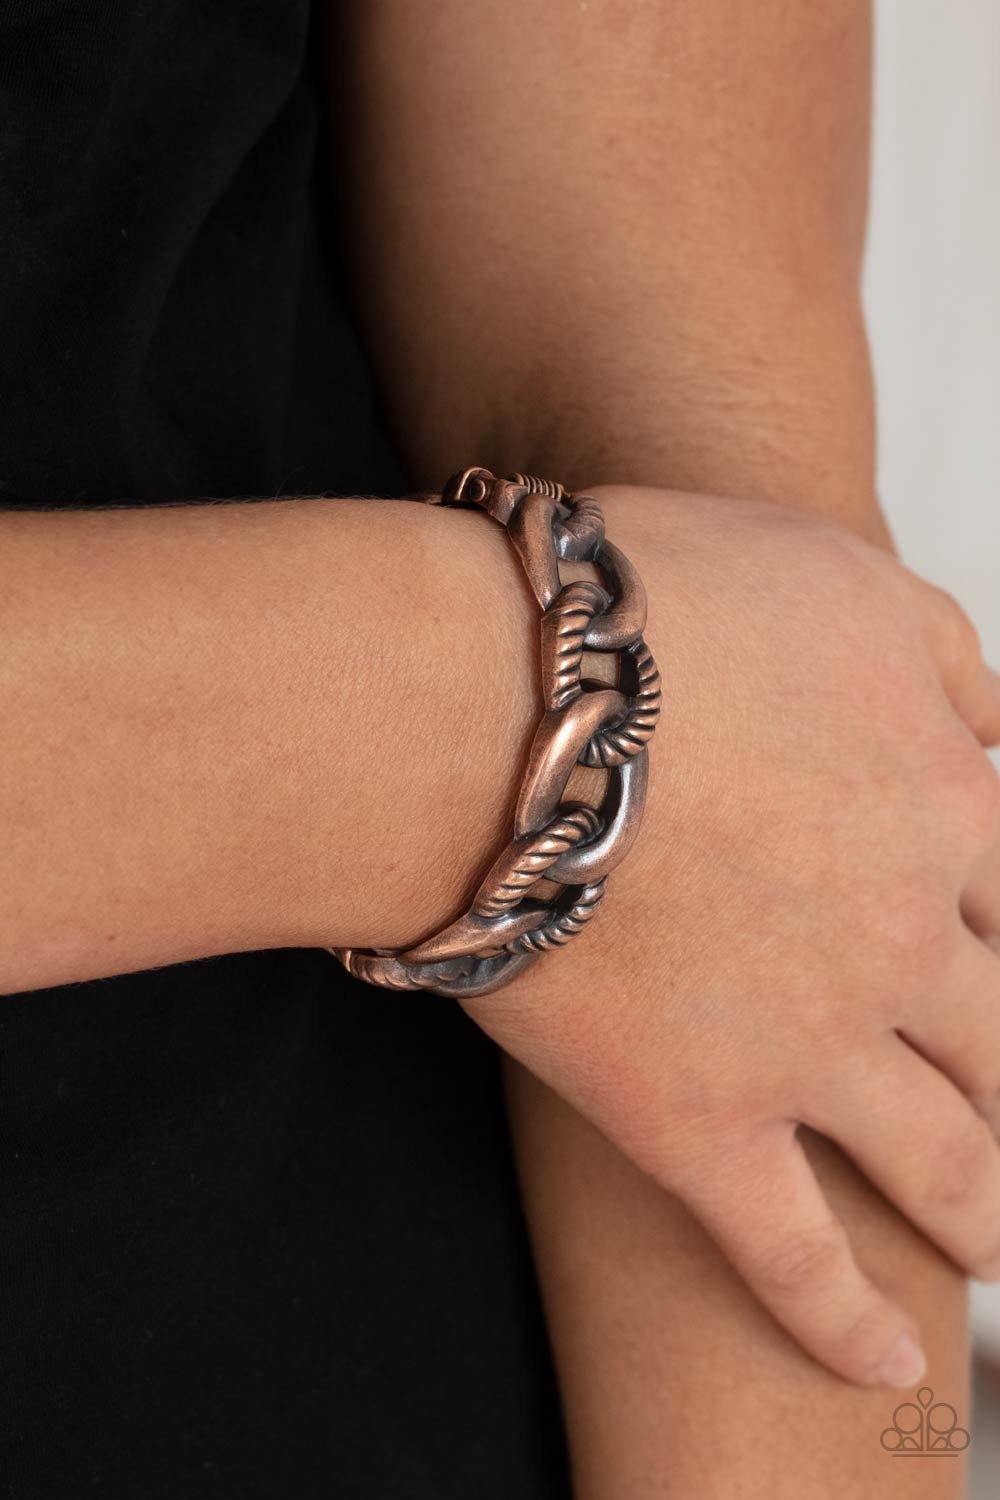 &lt;meta charset=\&quot;UTF-8\&quot;&gt;
&lt;p&gt;Featuring plain and textured finishes, chunky copper links interconnect into an edgy bangle-like cuff. Features a hinged closure.&lt;/p&gt;
&lt;p&gt;&lt;i&gt;Sold as one individual bracelet.&lt;/i&gt;&lt;/p&gt;
&lt;p&gt;&amp;nbsp;&lt;/p&gt;